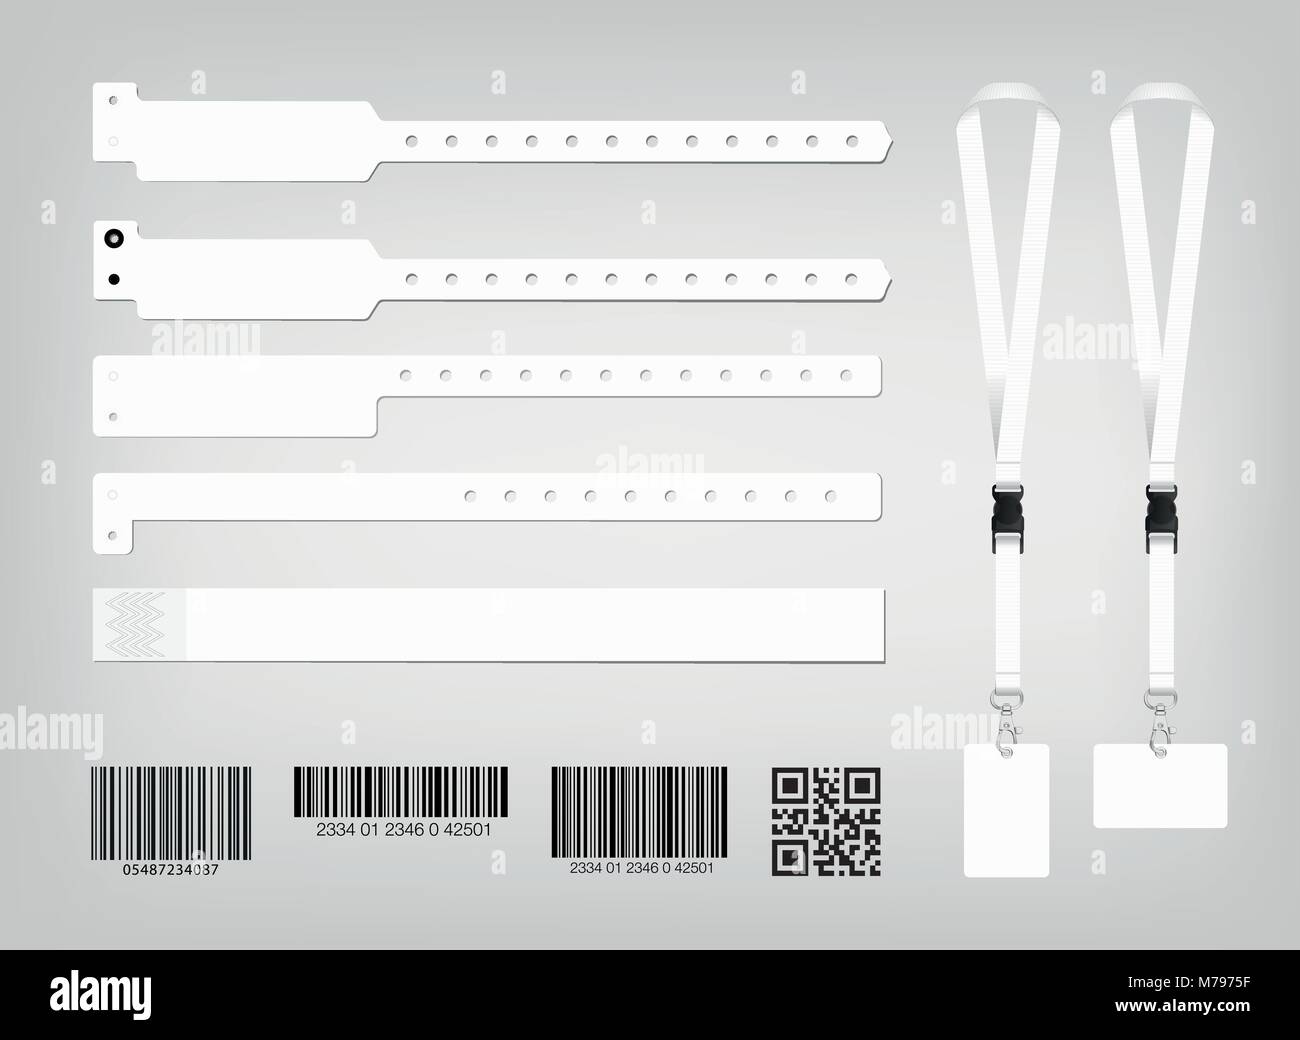 Wristband Hospital Wristbands Vector Images 70